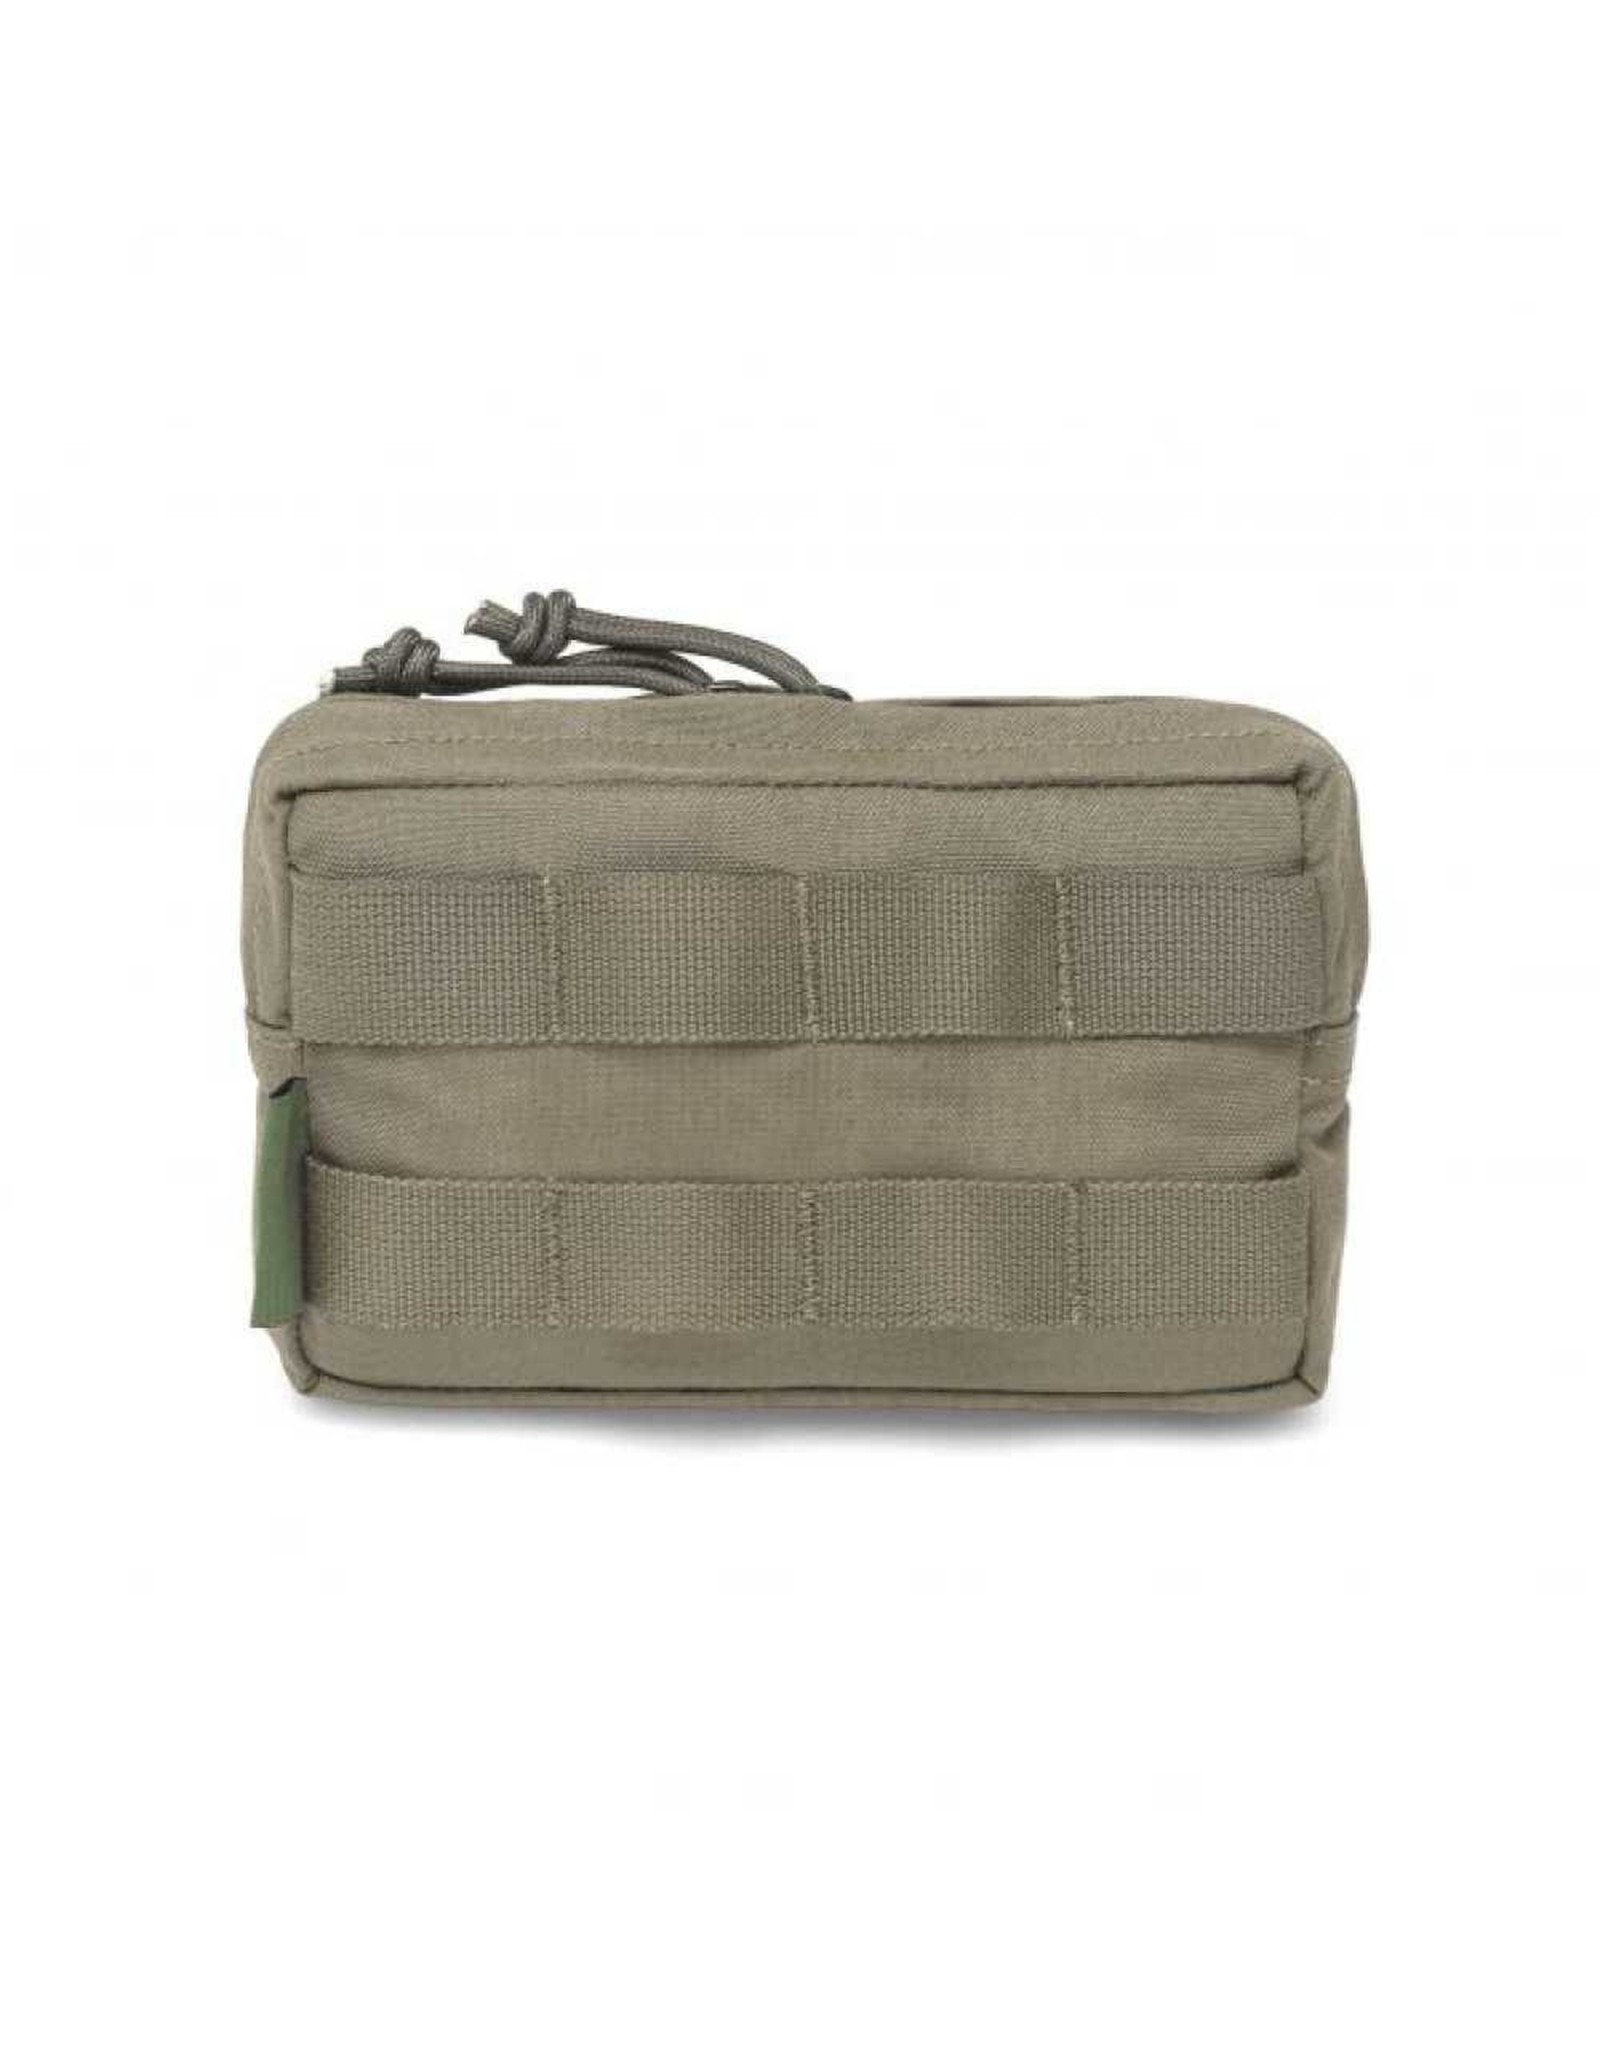 Warrior Elite OPS Small Horizontal Molle Pouch - Ranger Green